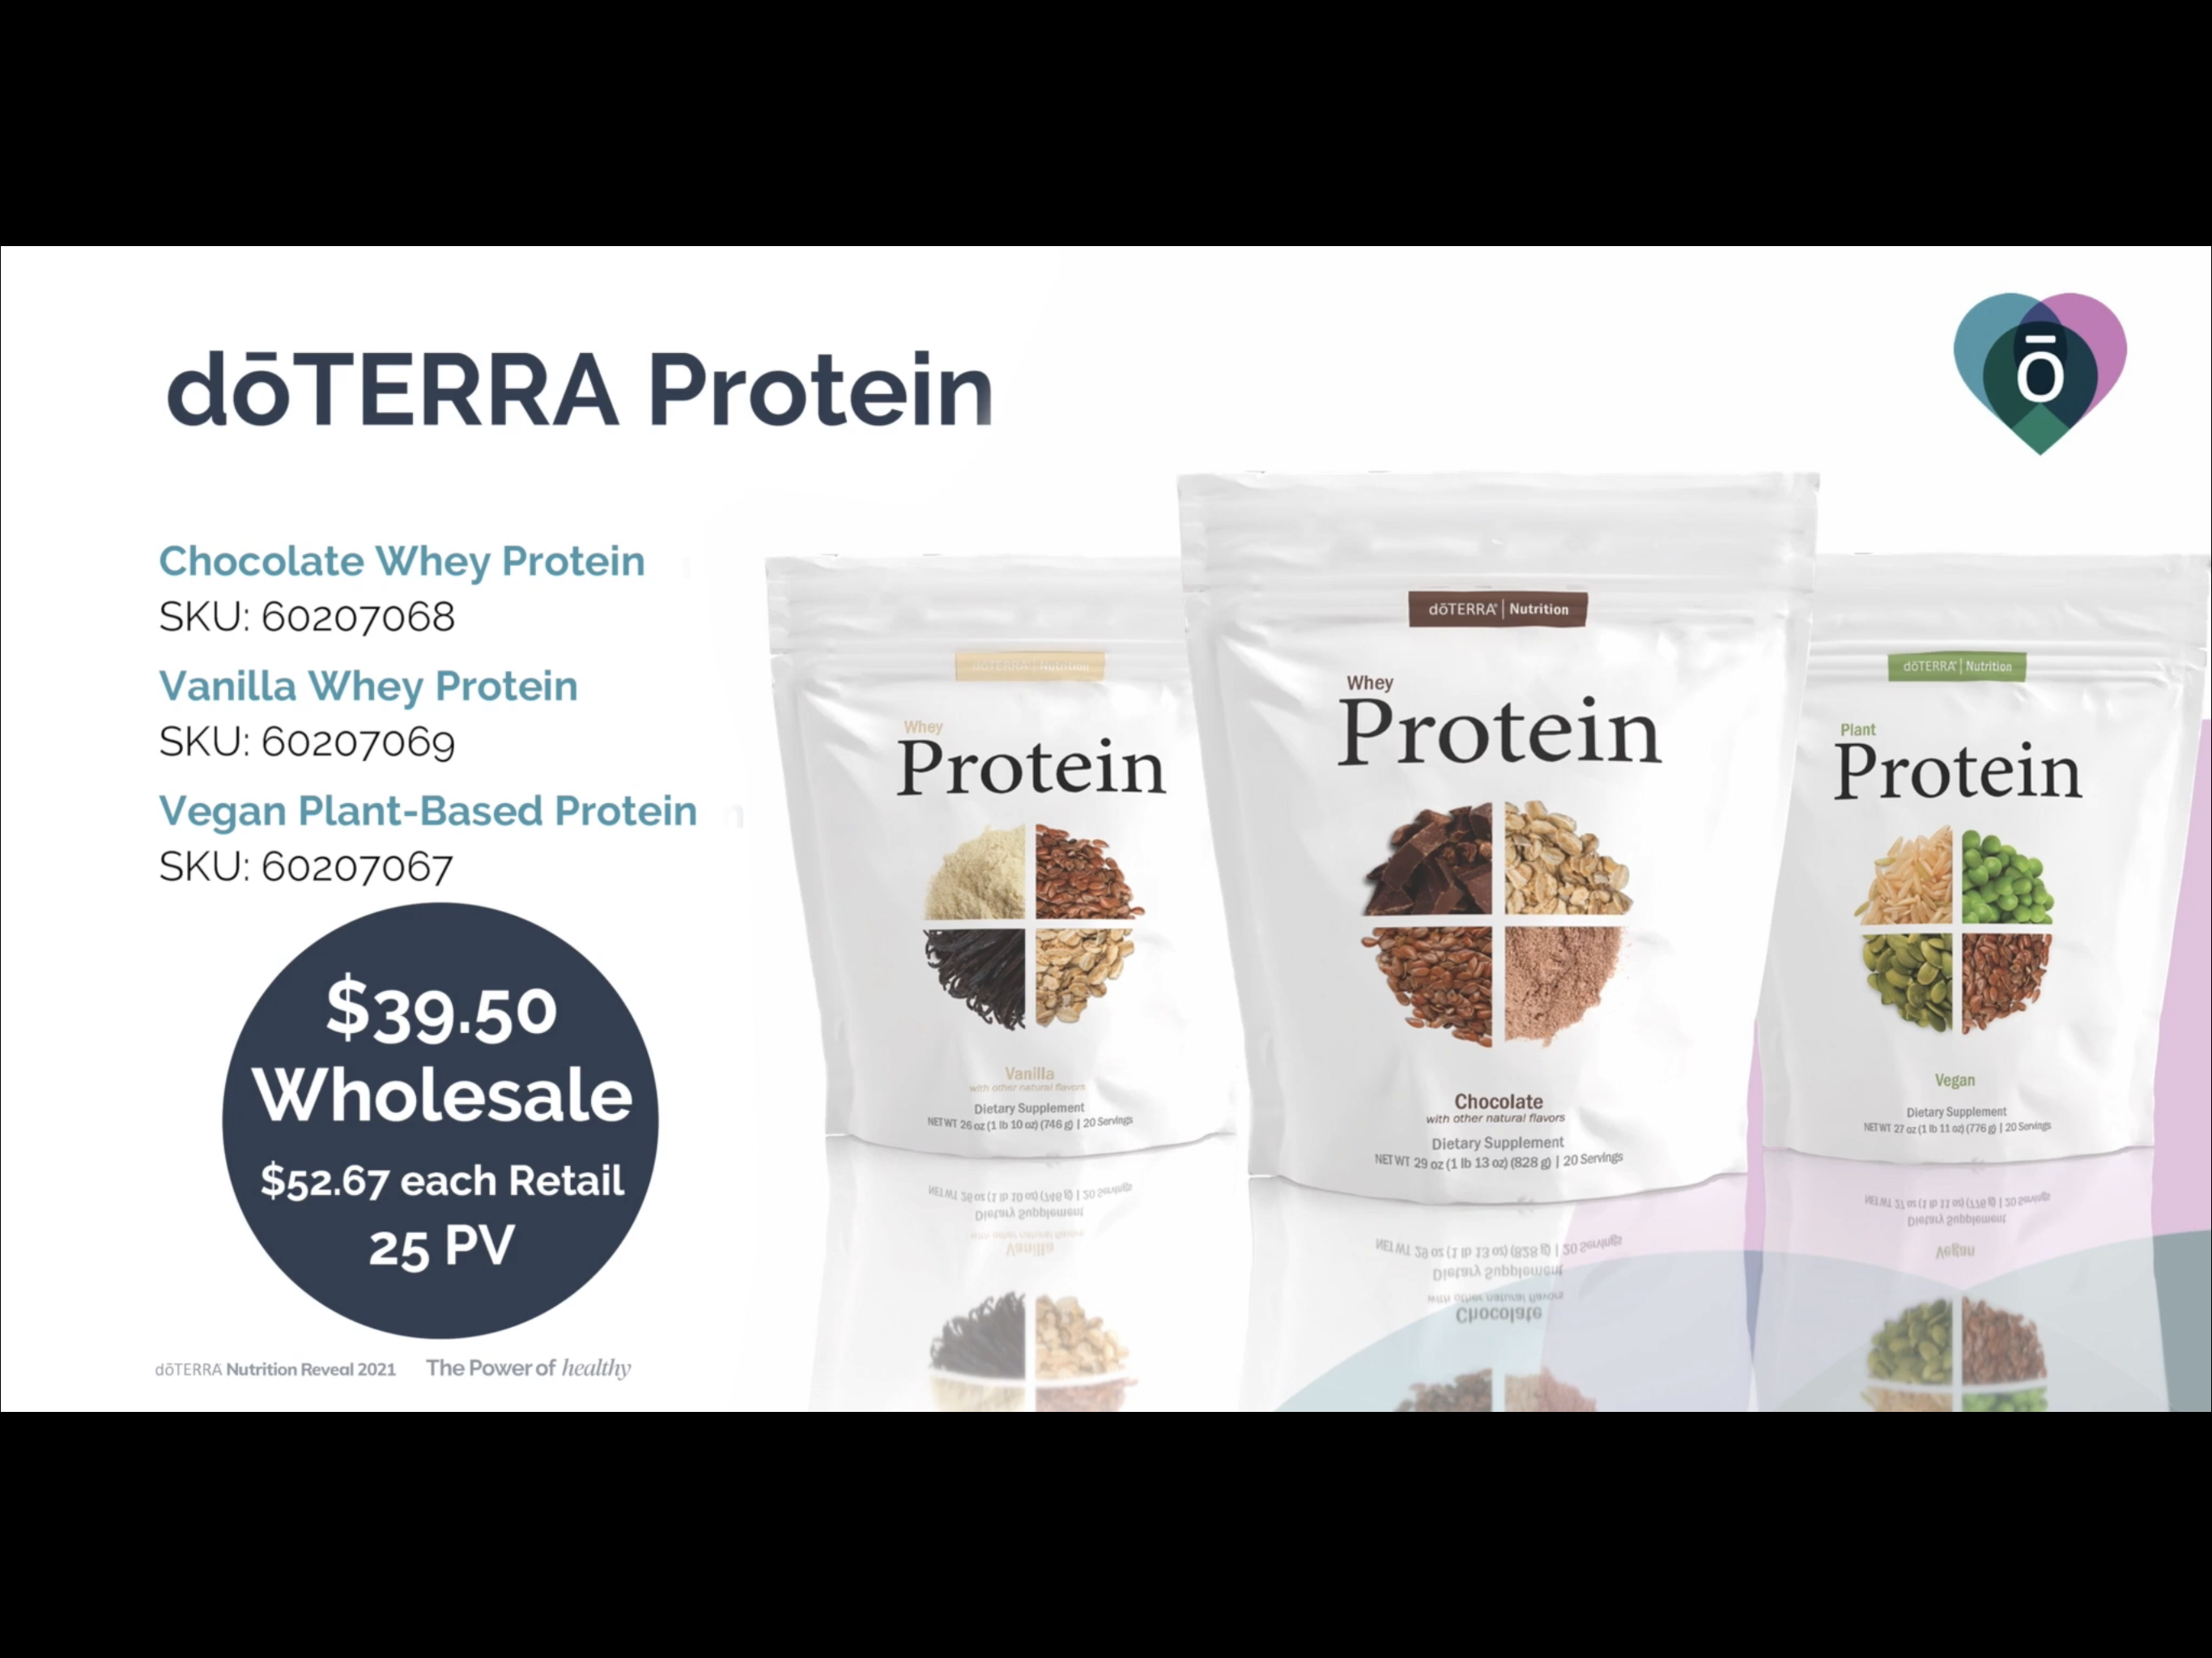 doTERRA complete Protein Nutrition